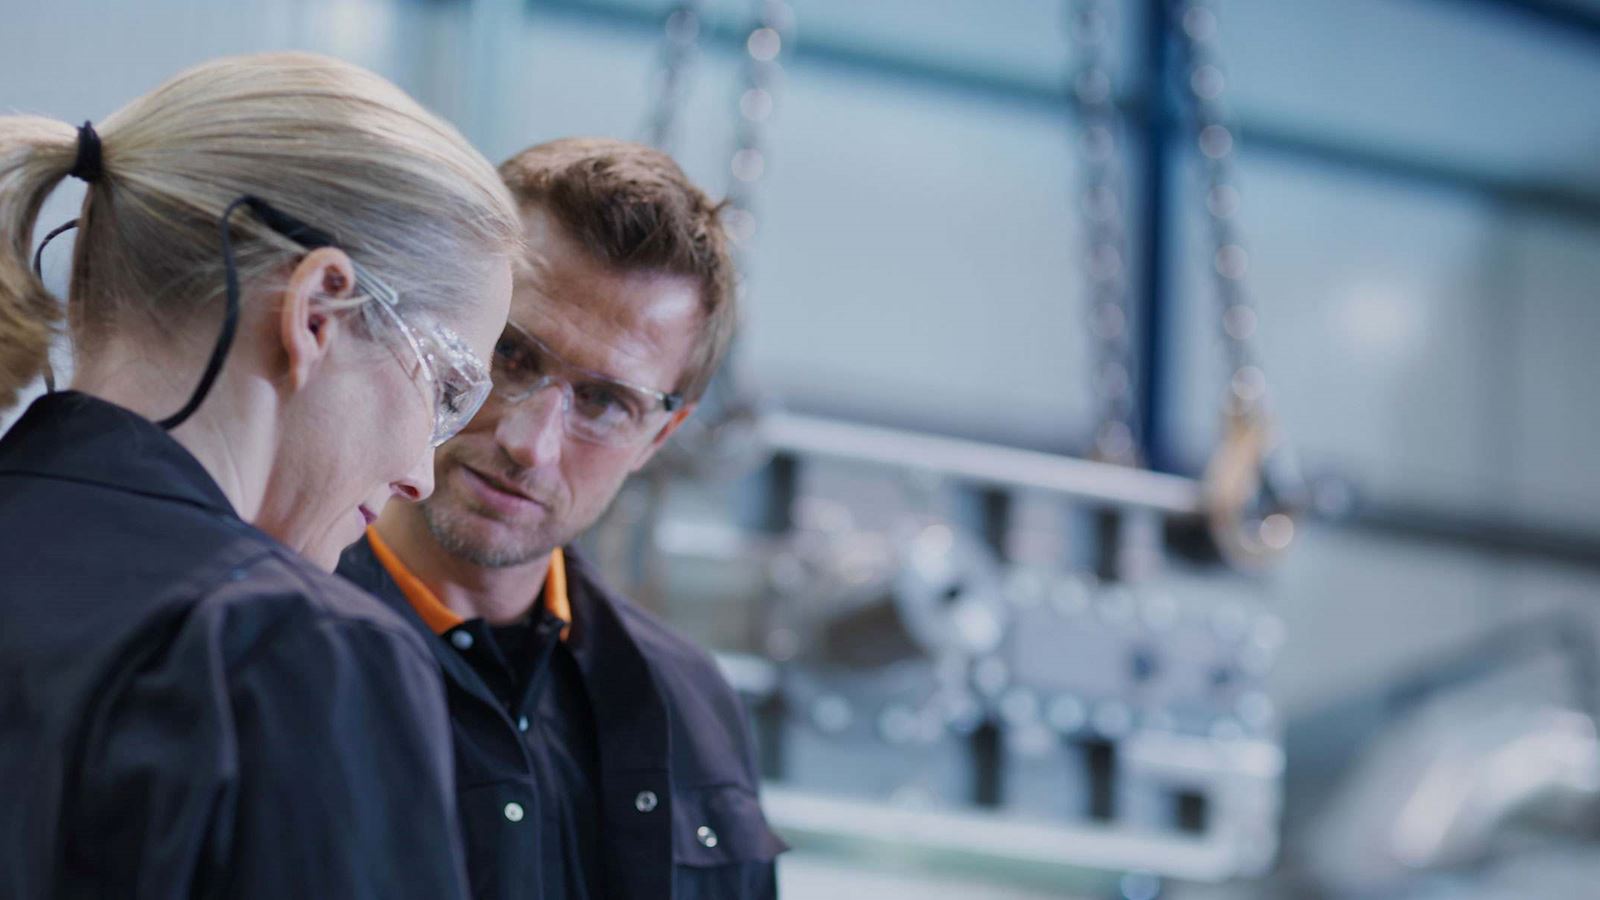 Two people in a factory wearing security glasses